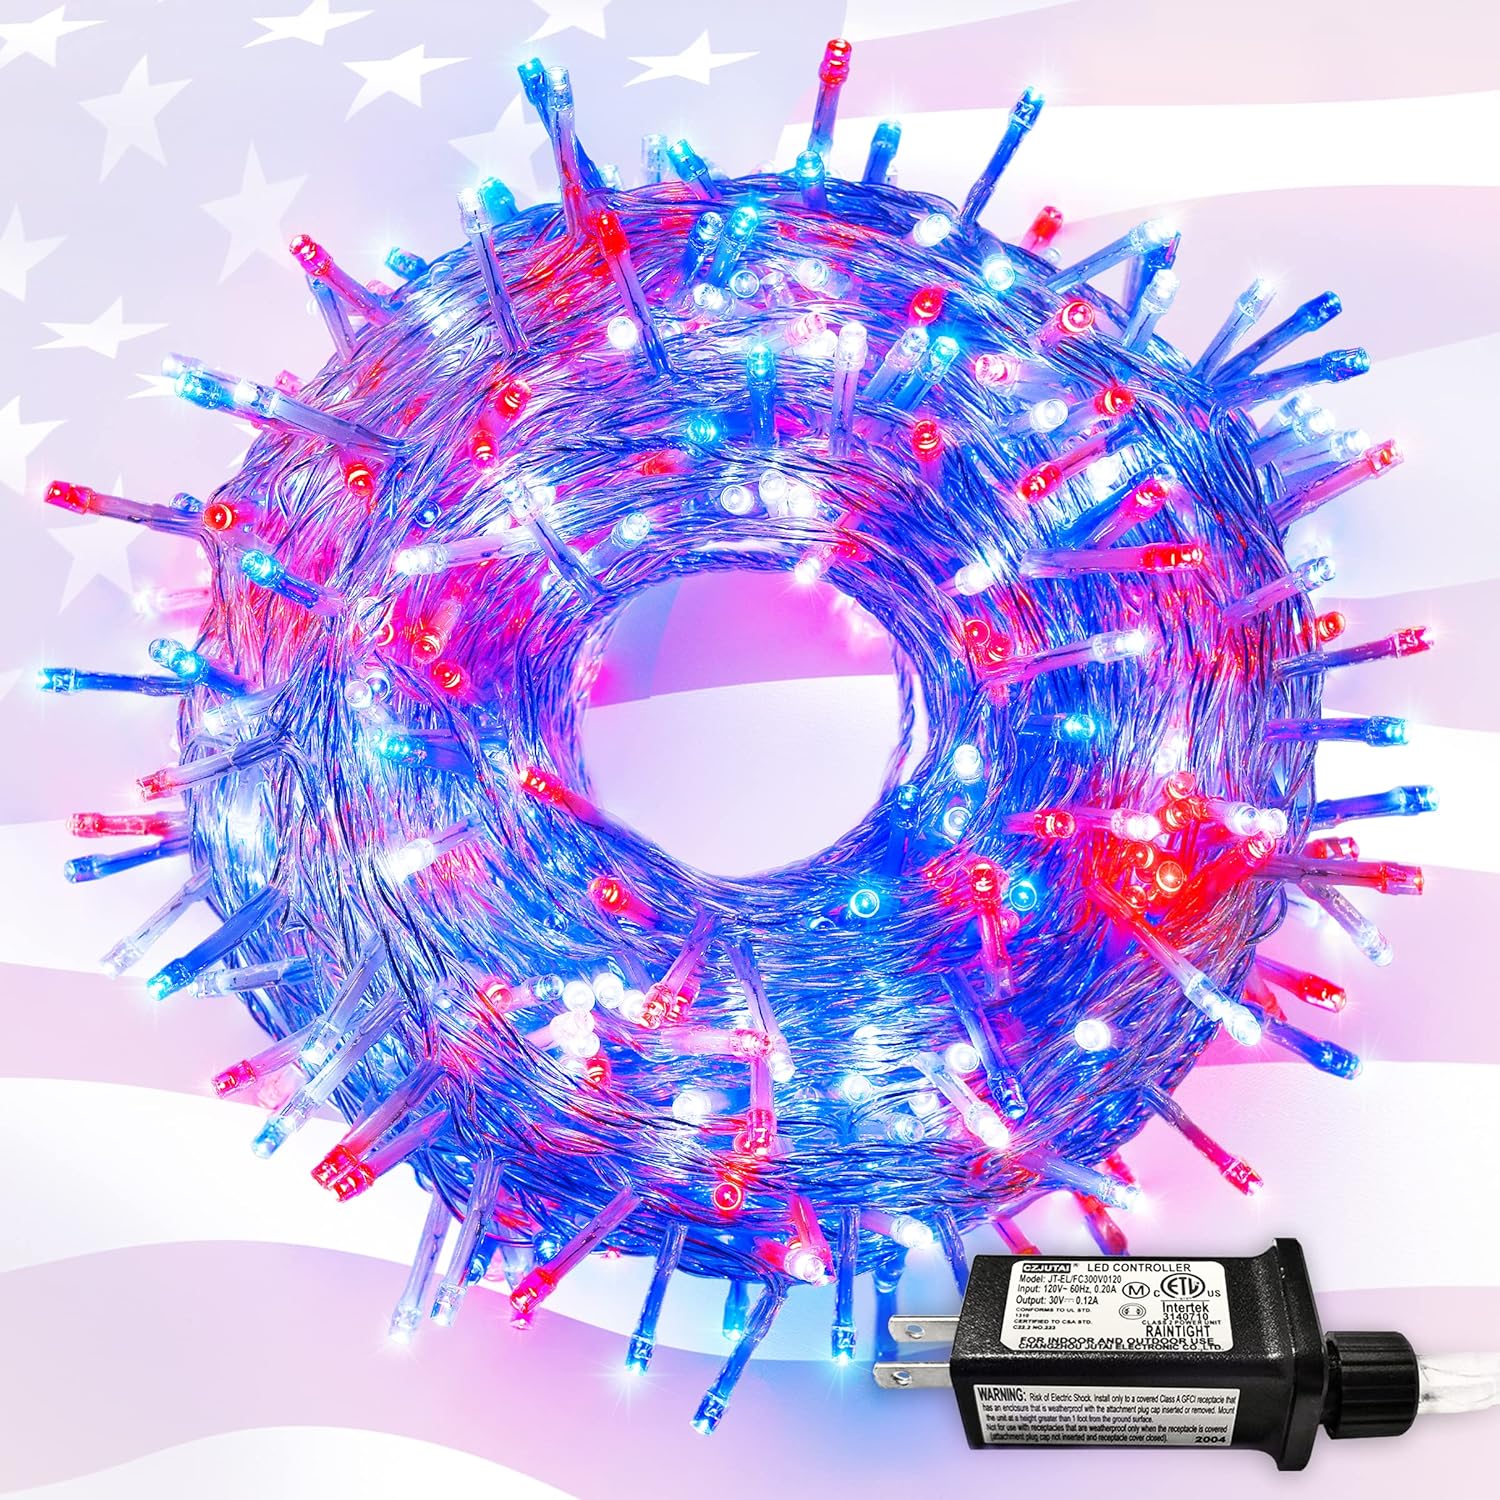 JMEXSUSS Red White & Blue Lights Clear Wire, 66 Ft 200 LED 4th of July Decorations String Lights Indoor Plug in, Christmas Lights for Independence Day Celebration Party Home Patriotic Holidays Decor